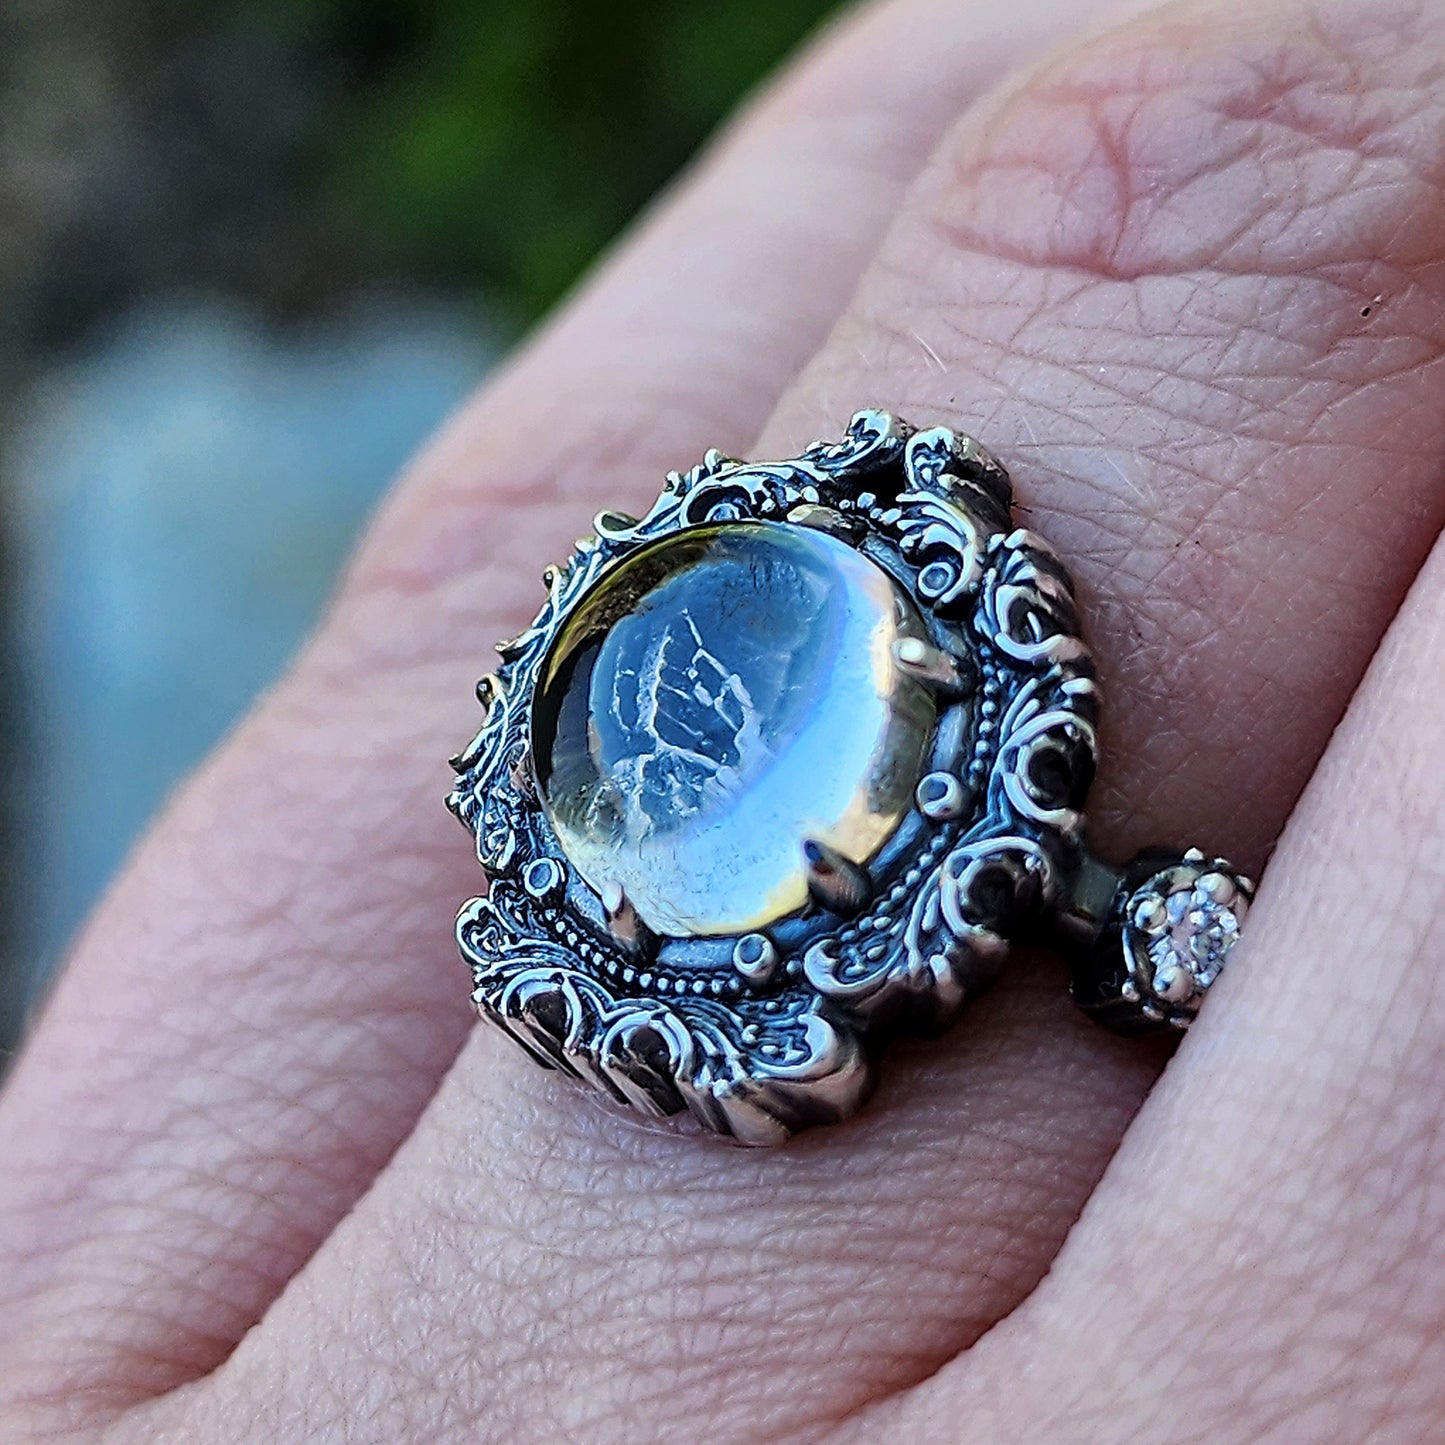 Butterfly Shadow Box Ring with Domed Quartz and Sterling Silver Baroque Frame - Diamond Side Band with Scrolls - Bug Jewelry